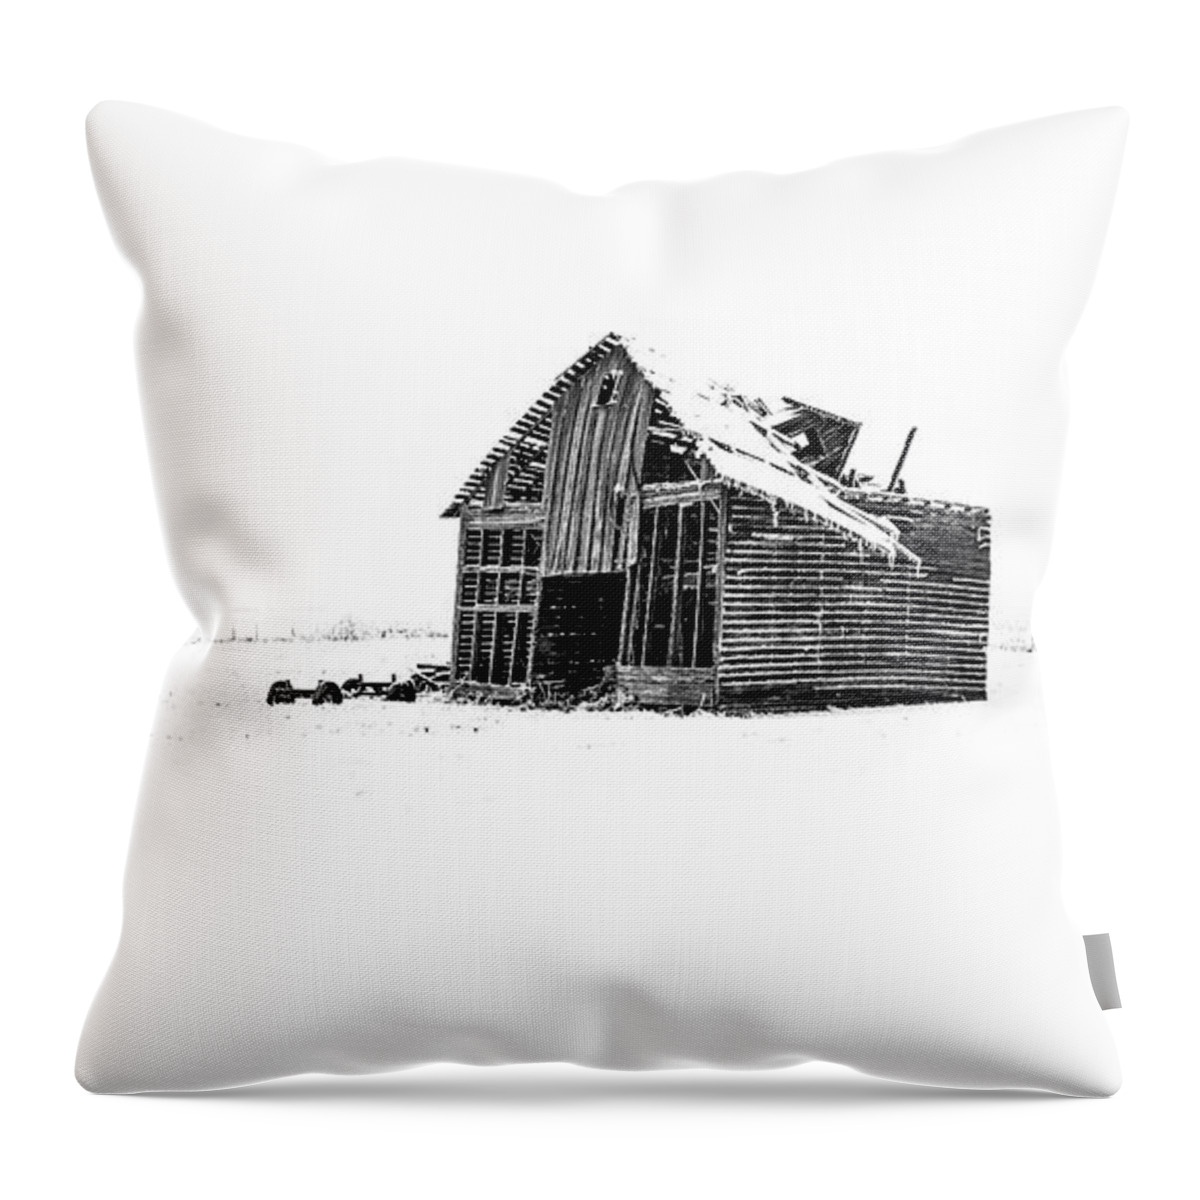 Central Illinois Throw Pillow featuring the photograph Winter Weathered Barn by Ray Silva